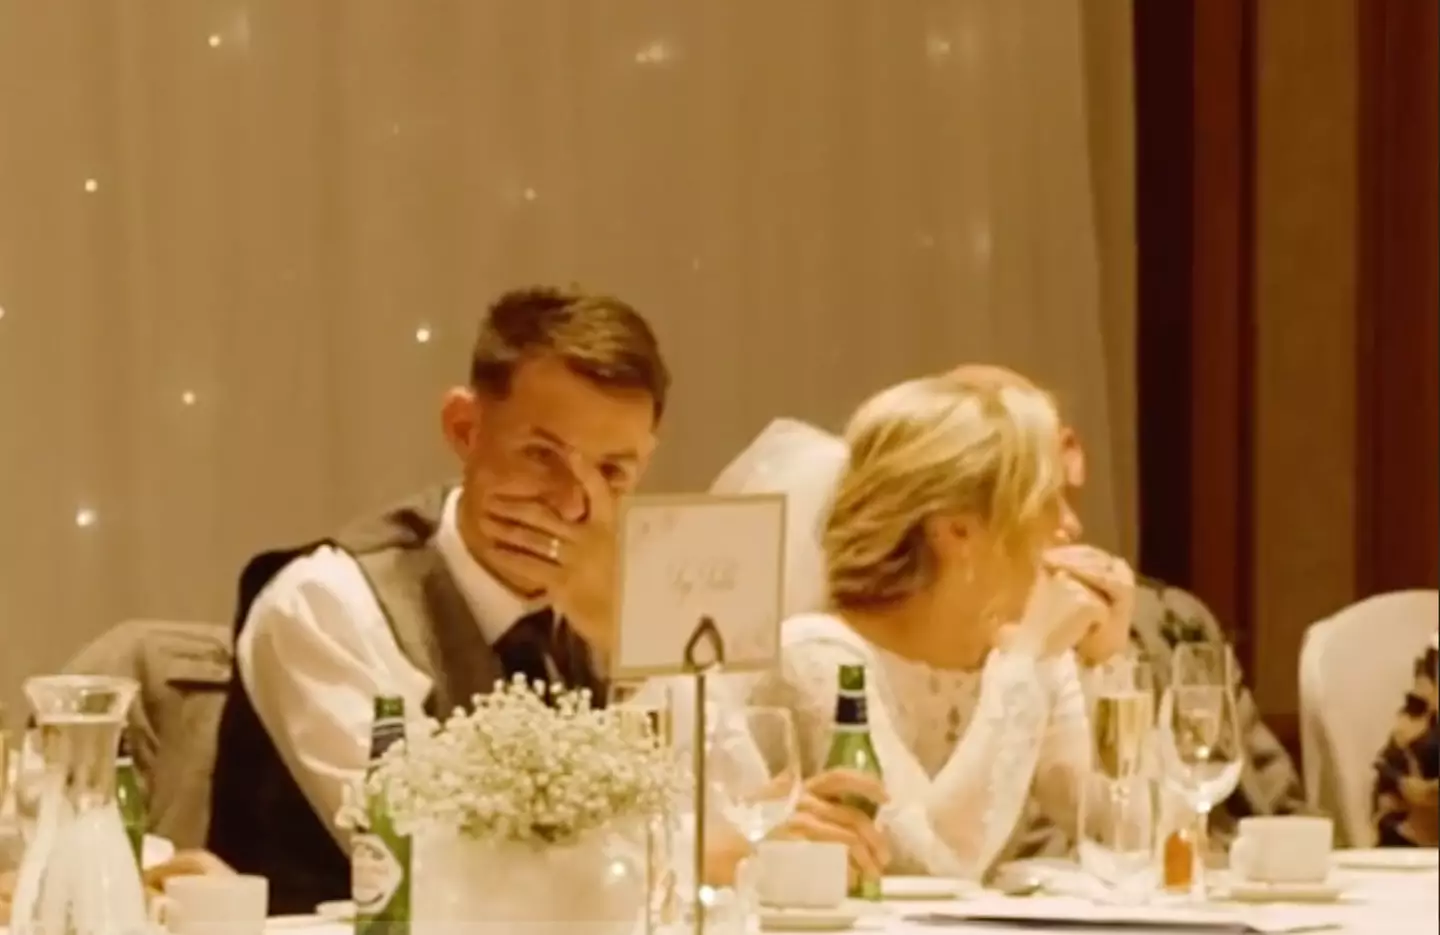 The bride and groom were left completely red faced at the speech. TikTok / @weareoneweddingfilms